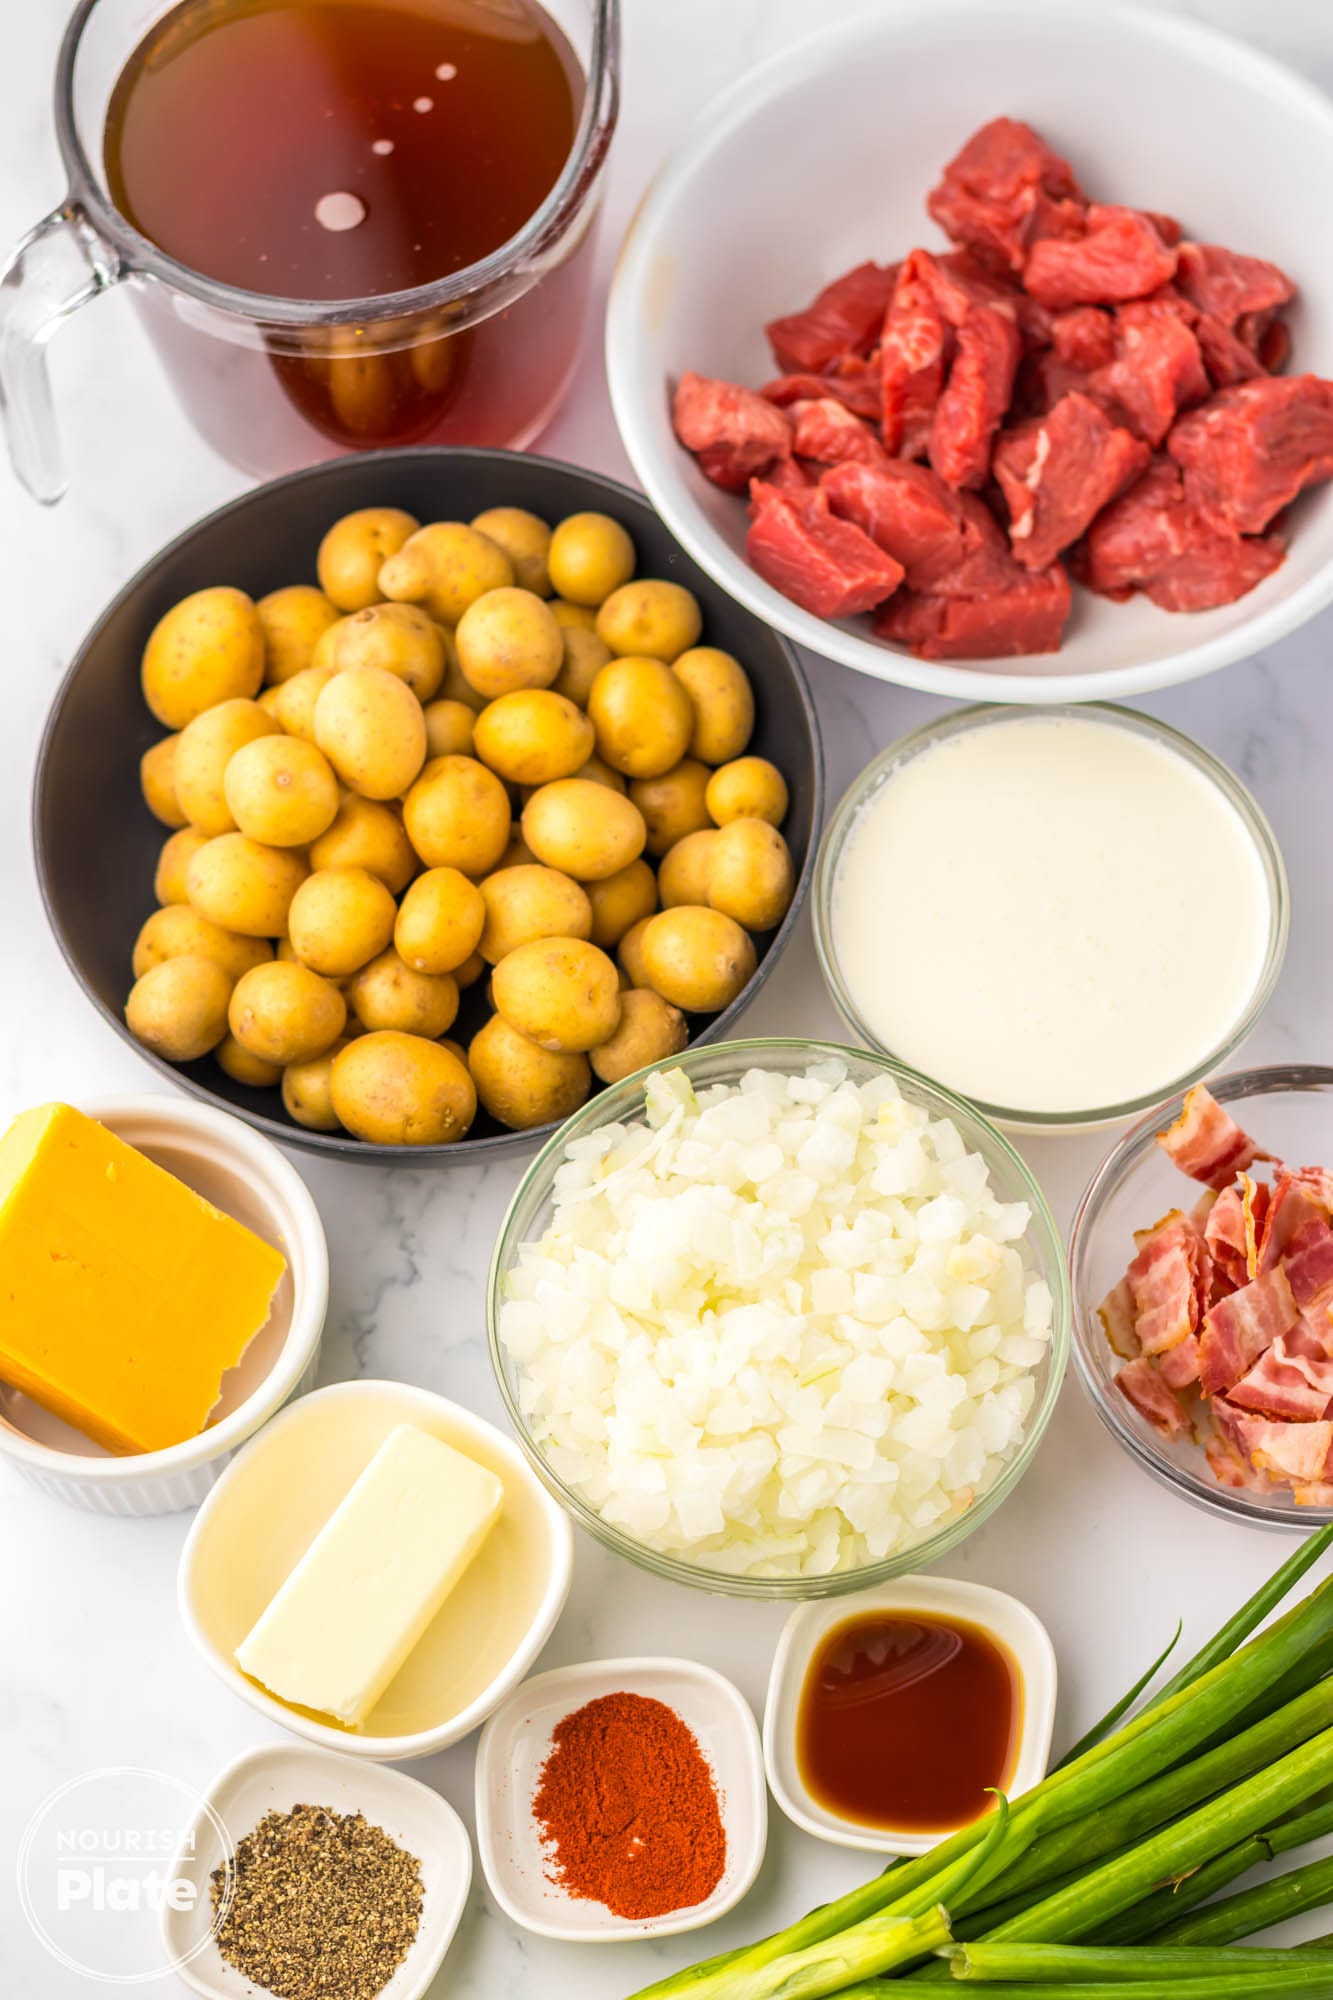 Ingredients needed to make steak and potato soup